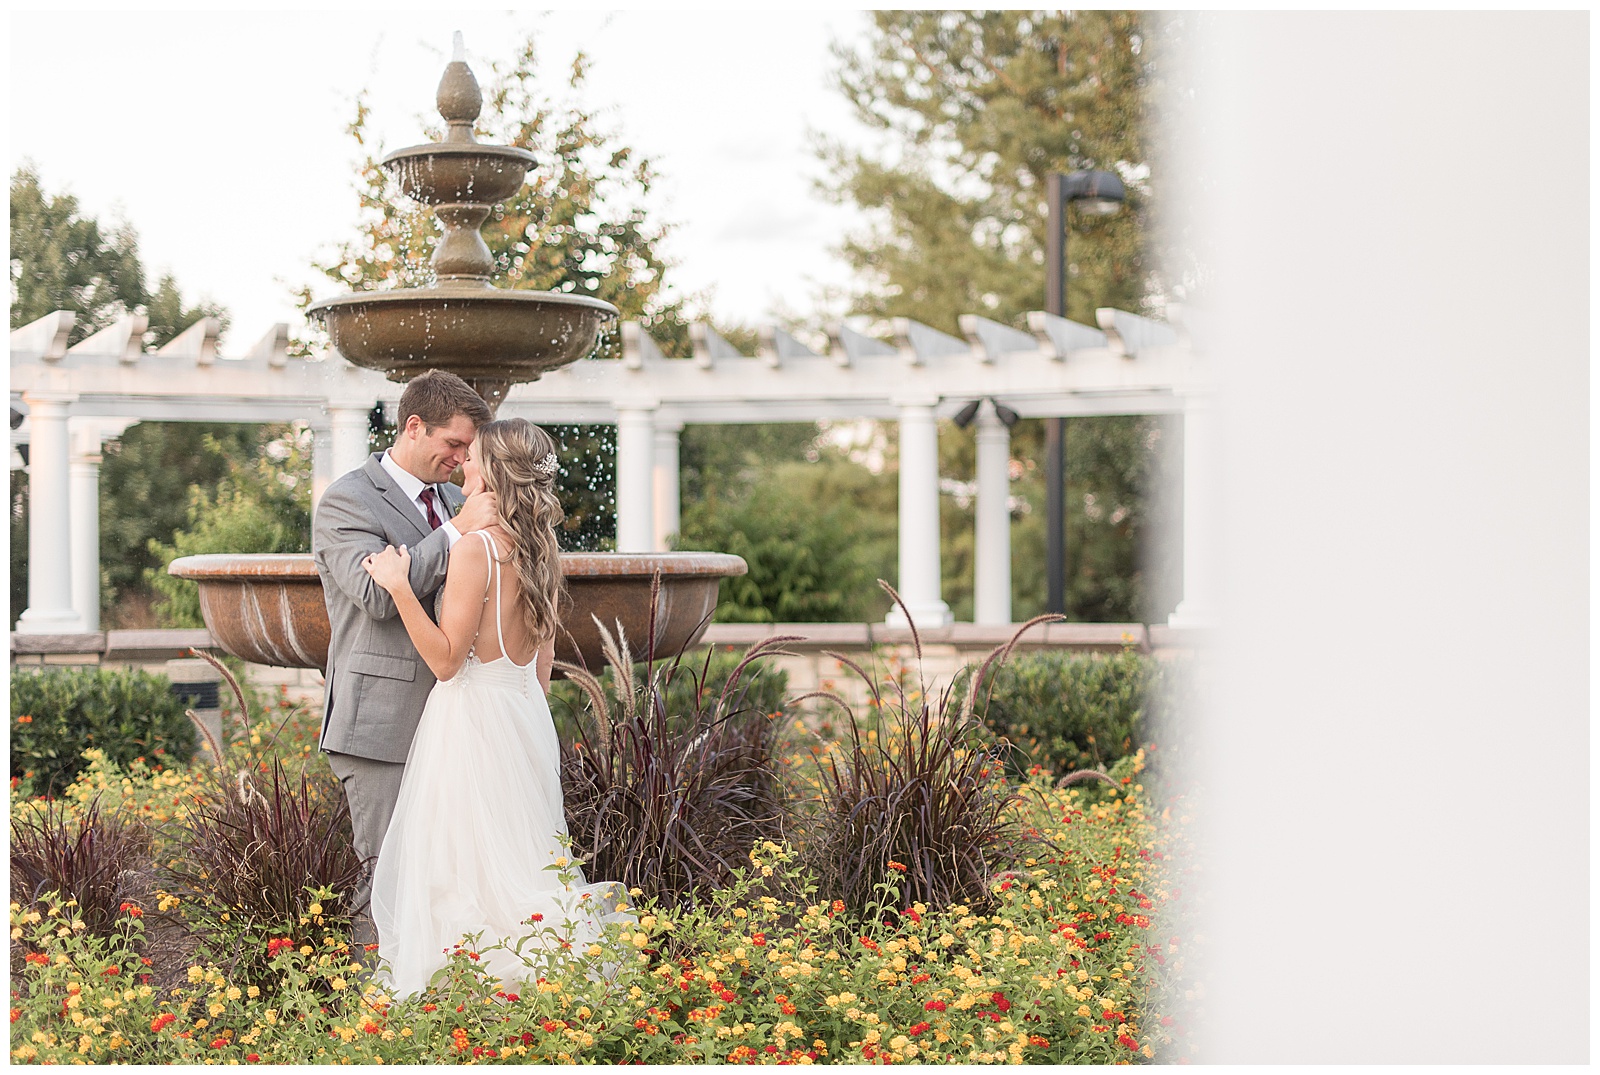 sunset photos at Purcell Friendship Hall surrounded by colorful flowers and fountain